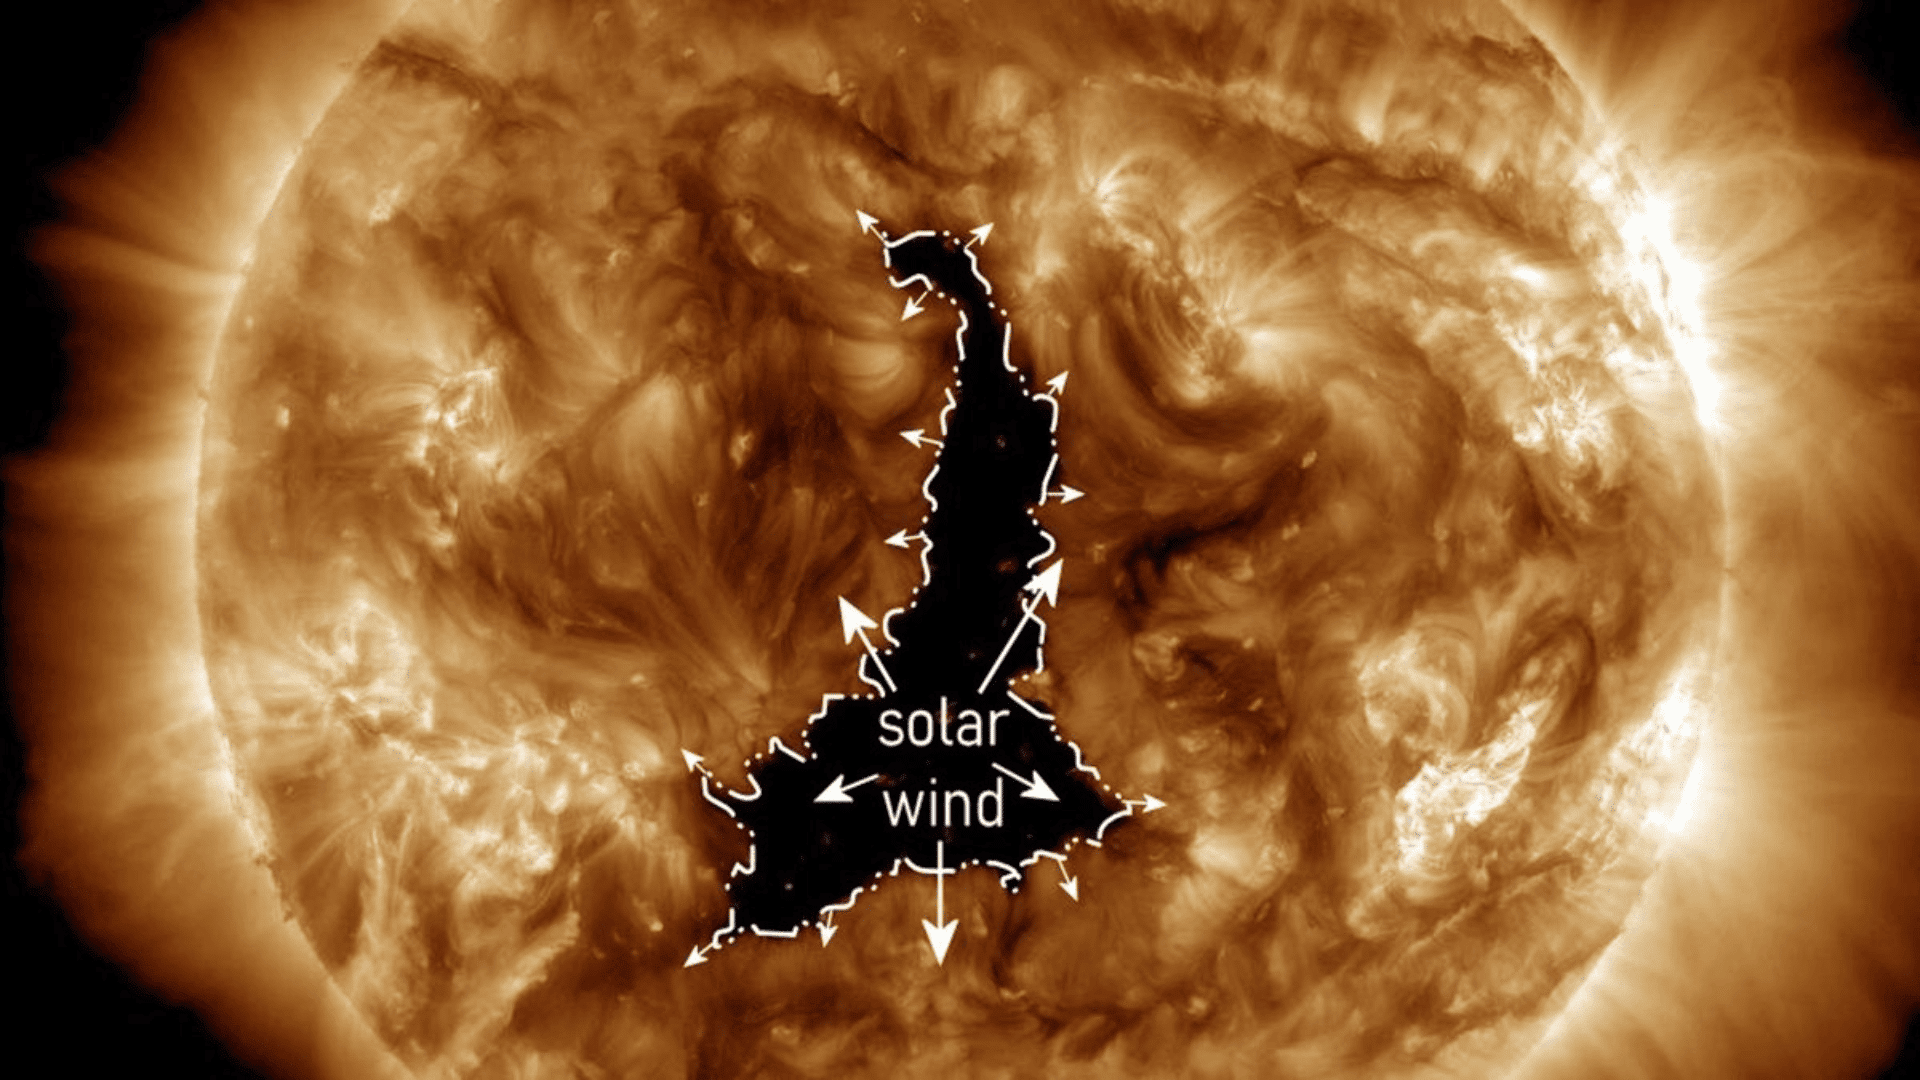 The gigantic coronal hole is more than 60 times wider than Earth.